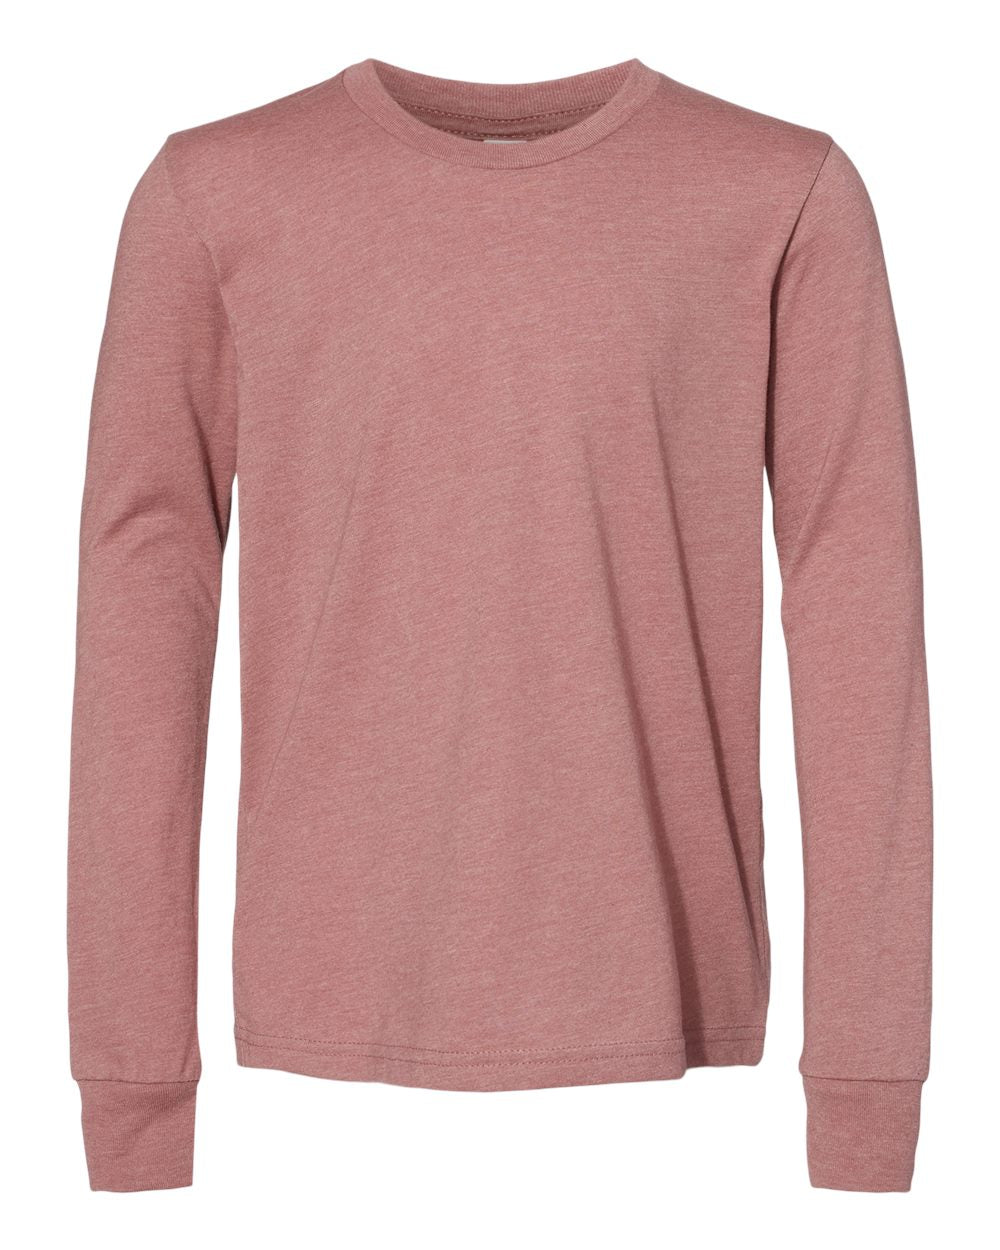 Bella + Canvas Youth Long Sleeve (3501y) in Heather Mauve